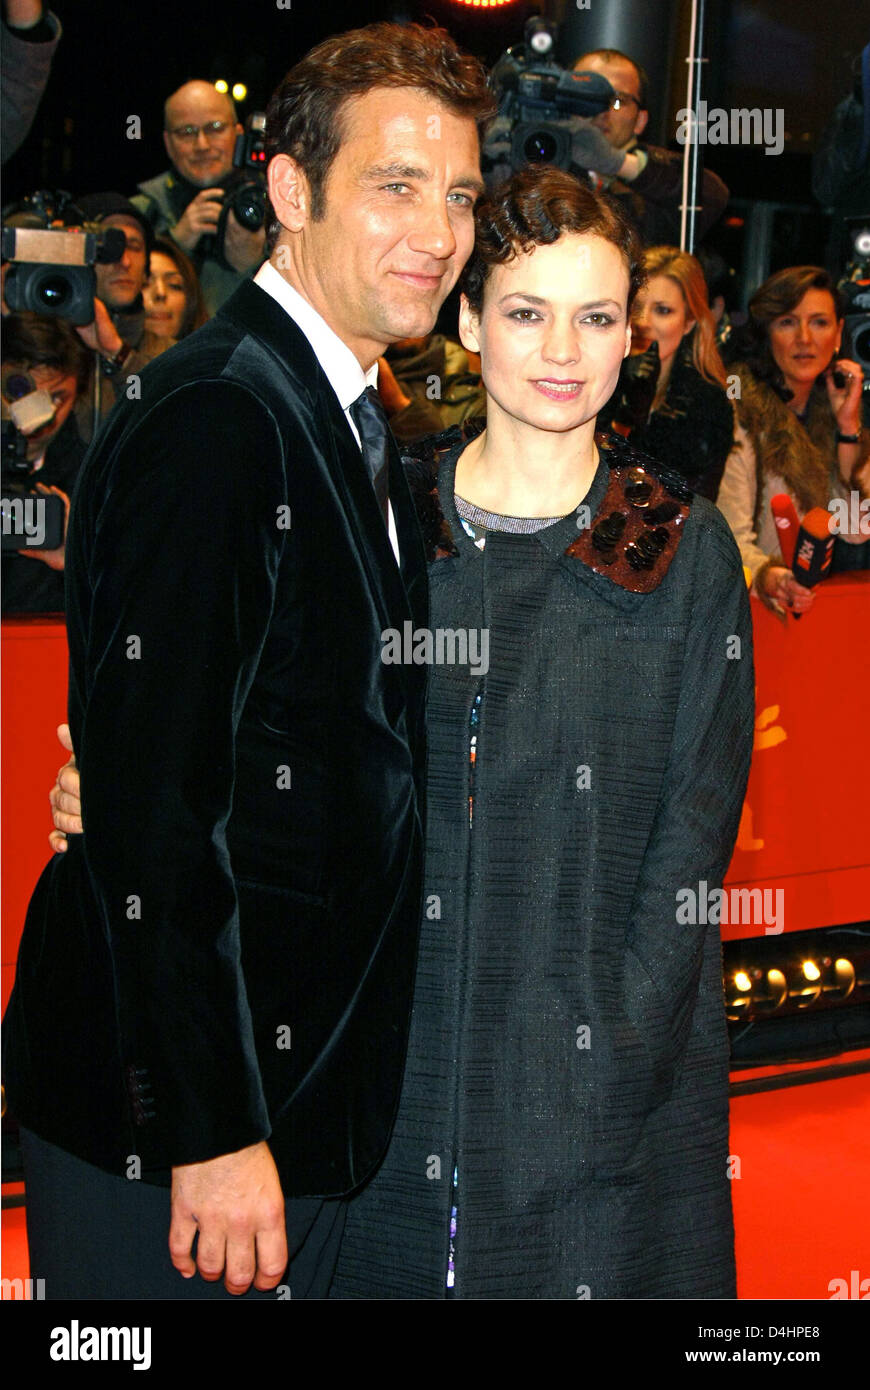 British actor Clive Owen and his wife Sarah-Jane Fenton arrive for the premiere of the film ?The International? at the 59th Berlin International Film Festival, also referred to as Berlinale, in Berlin, Germany, 05 February 2009. The film opens the 59th Berlinale at Potsdamer Platz. Within the scope of the official competition, 18 movies will compete for the golden and silver bears. Stock Photo